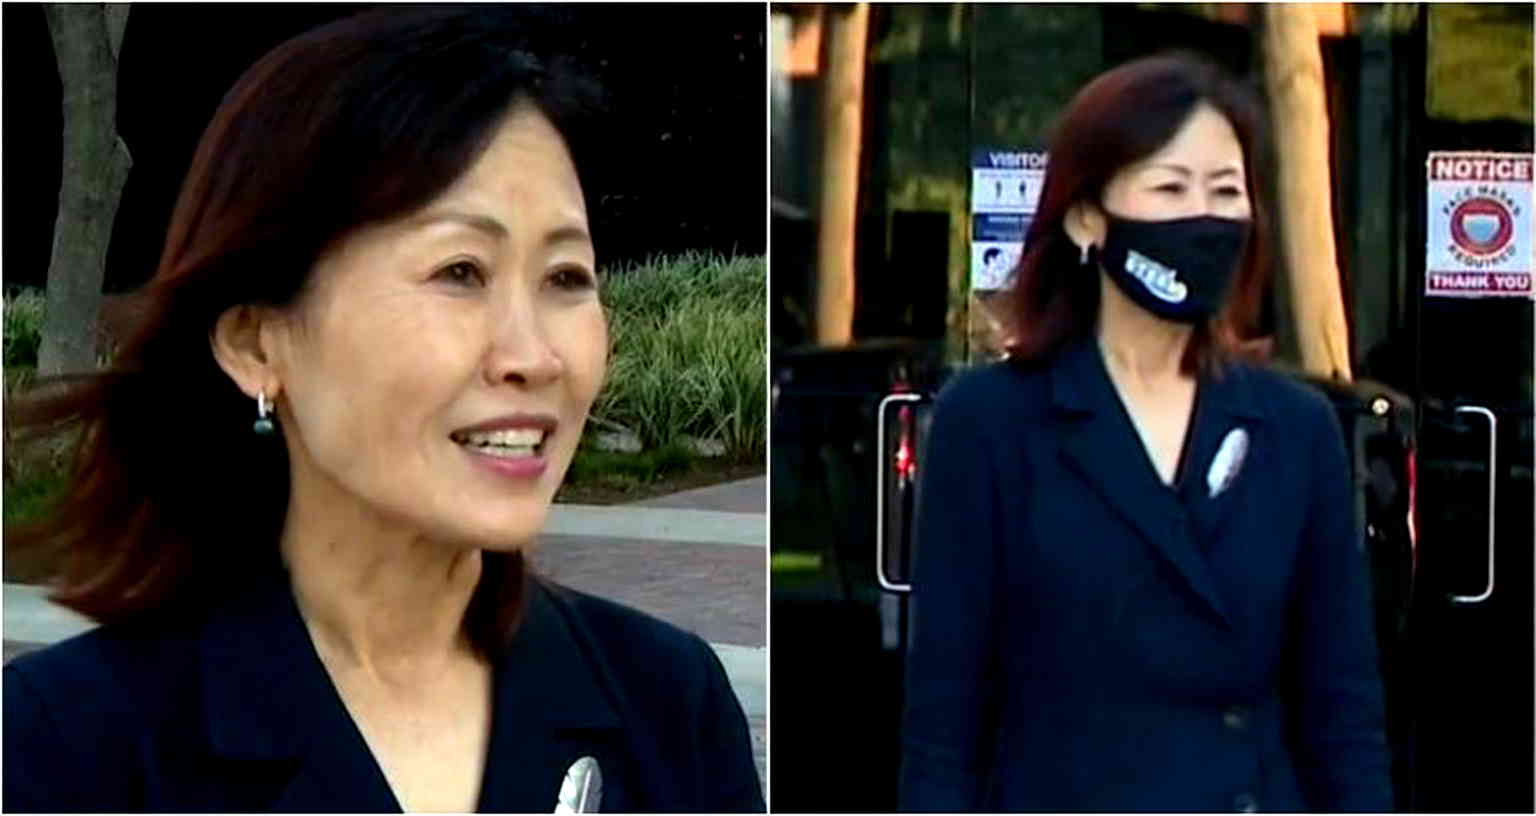 California Congresswoman Who Once Questioned Mask-Wearing Catches COVID-19